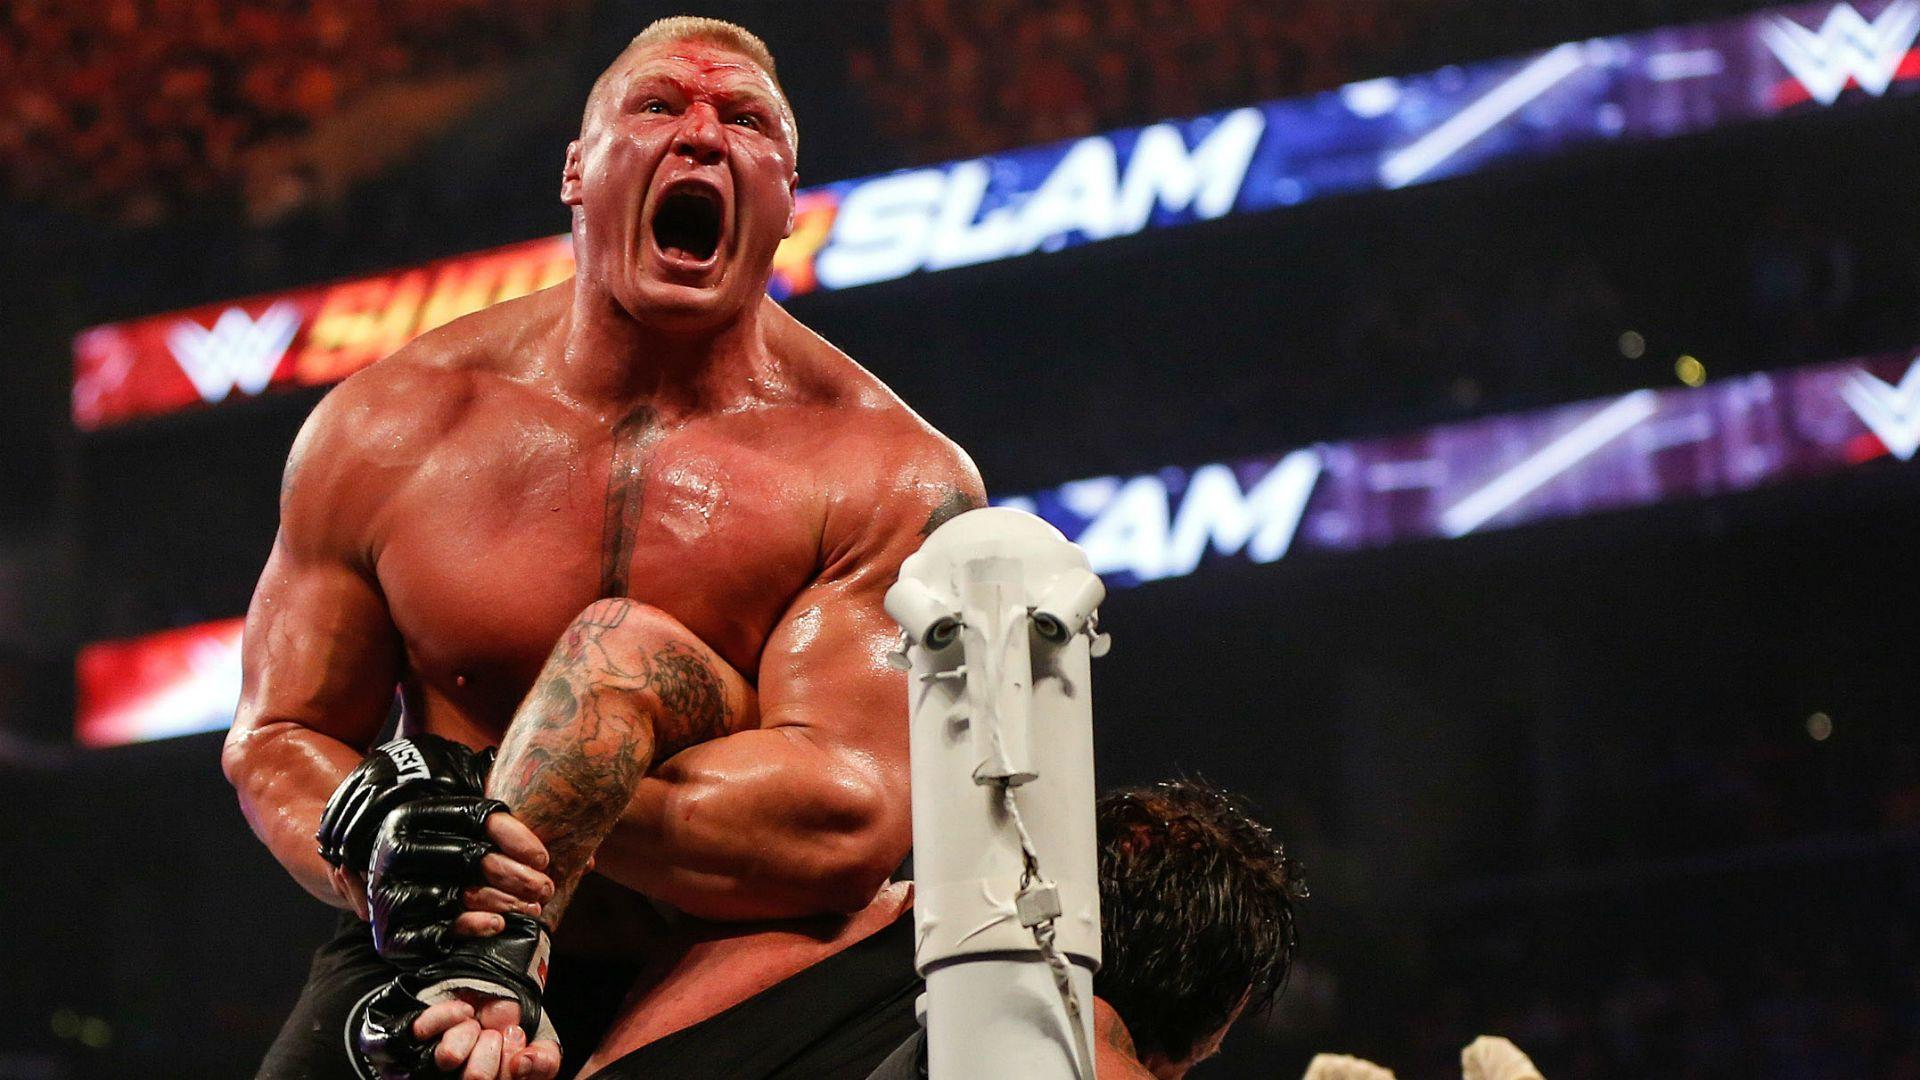 Paul Heyman: Brock Lesnar Wants To Compete Inside Of The Octagon